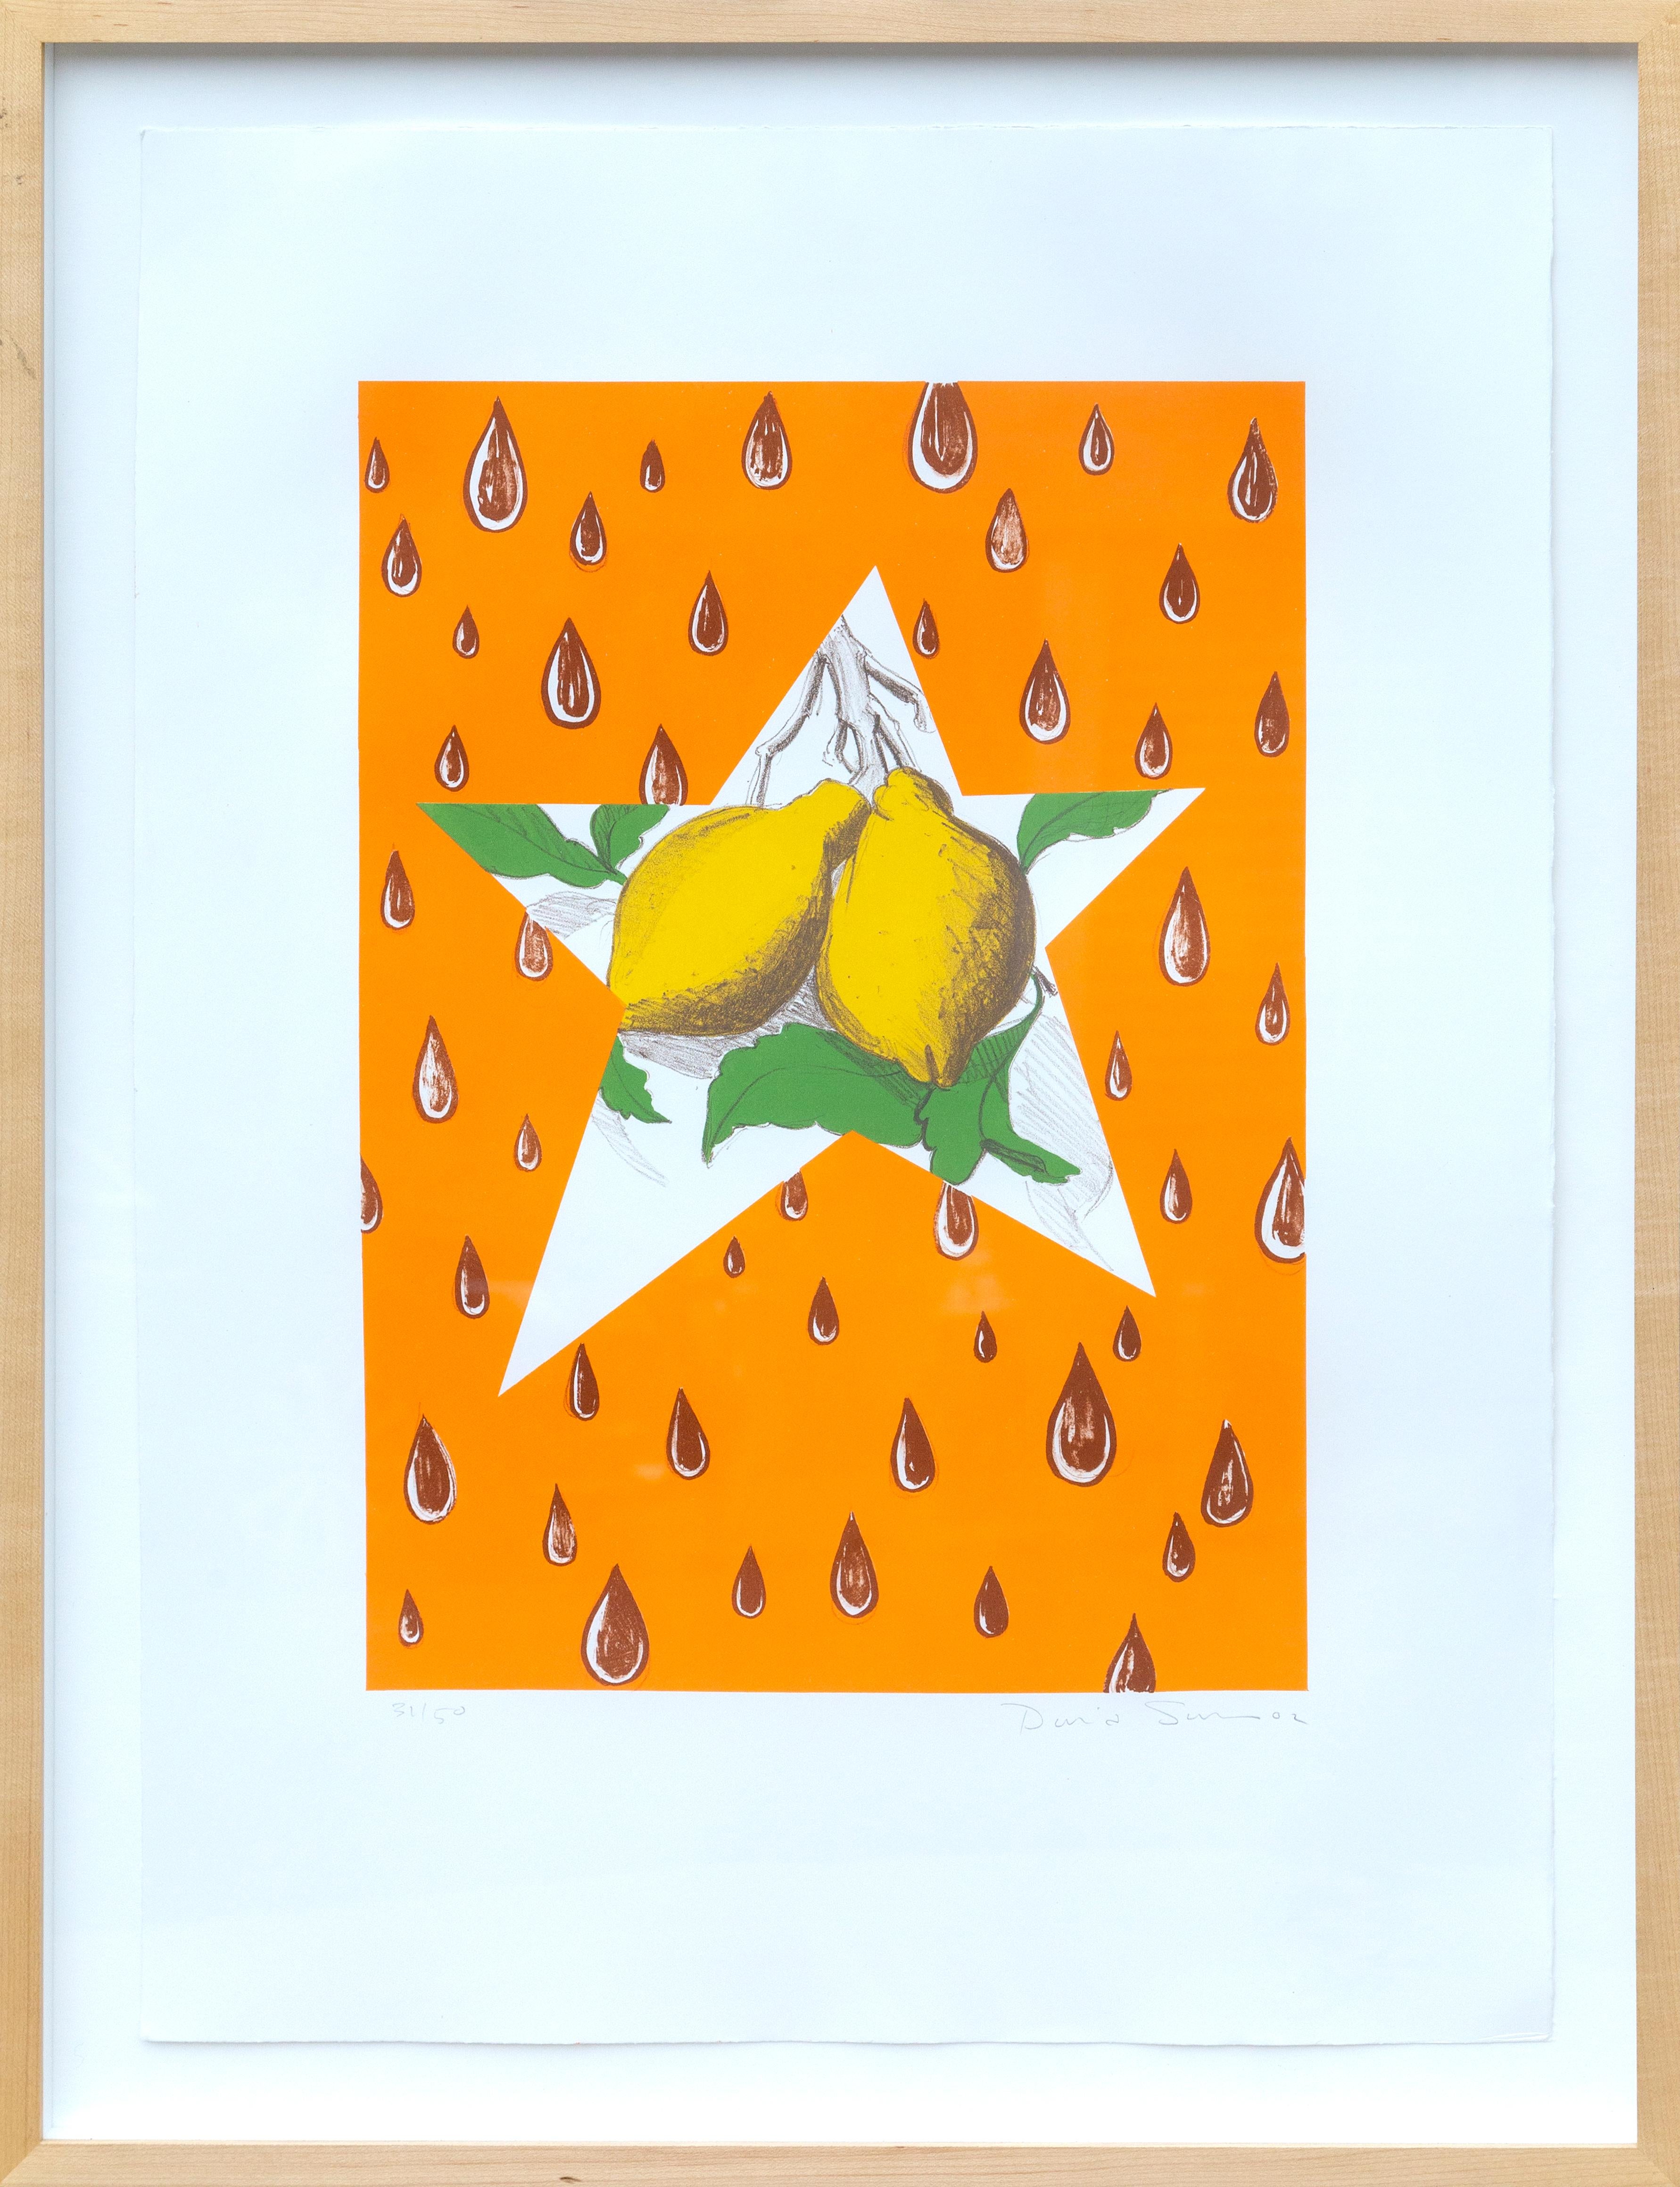 Artist: David Salle, American (1952 - )
Title: The Lemon Twig
Year: 2002
Medium: Lithograph, signed and numbered in pencil
Edition: 31/50
Size: 29.75  x 21.5 in. (75.57  x 54.61 cm)
Frame Size: 34 x 26 inches